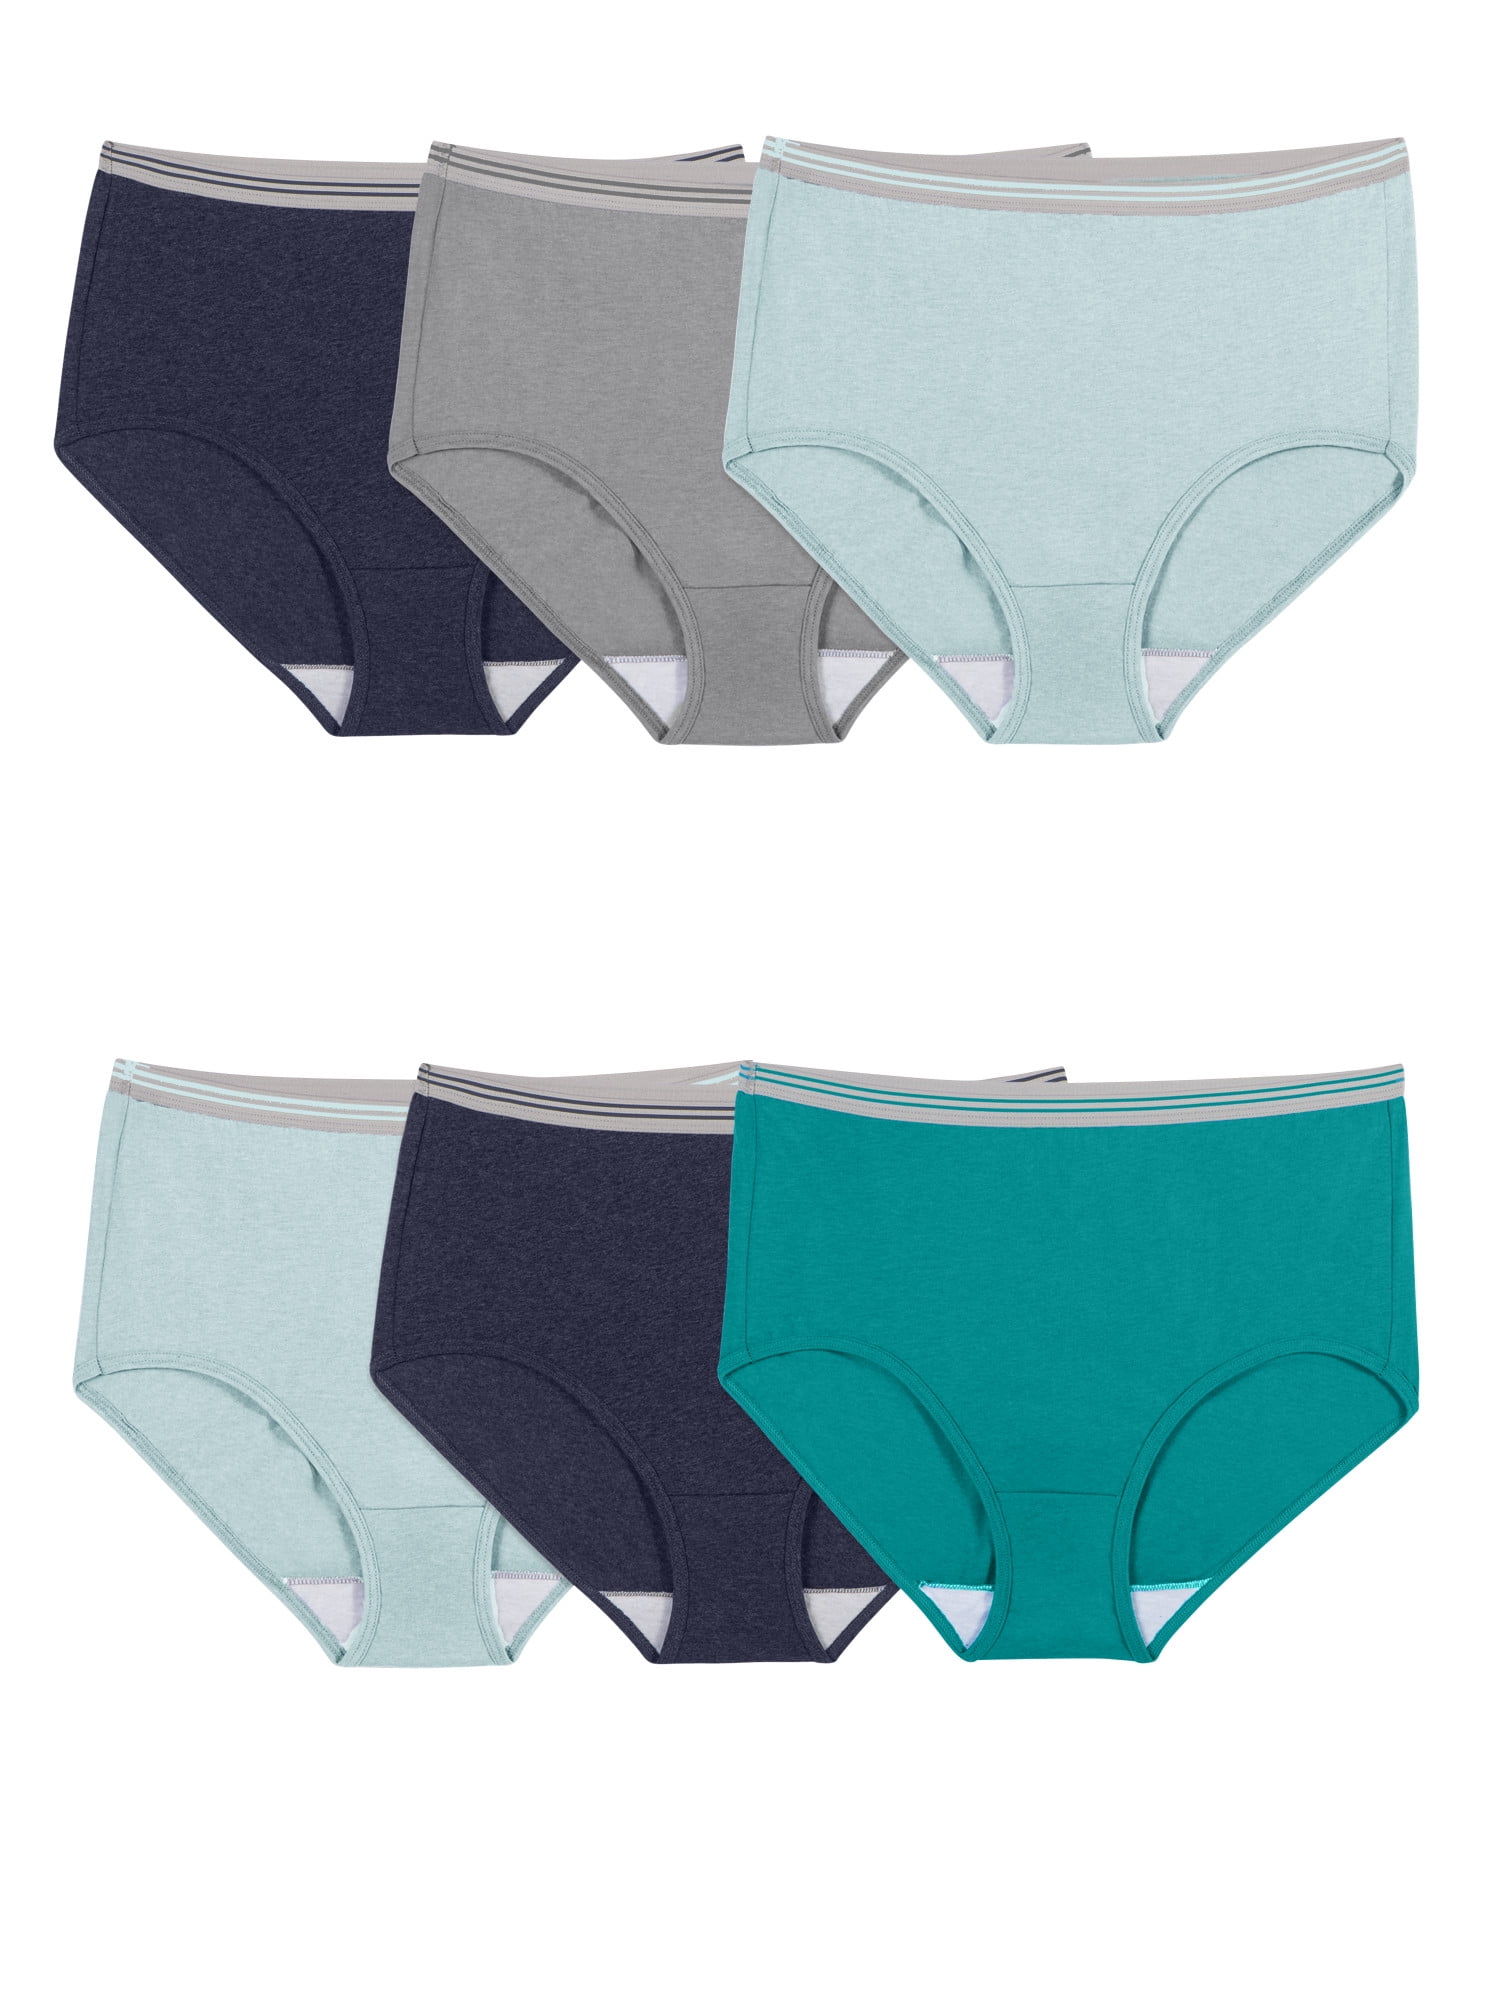 Fit for Me Women's Plus Size Brief Underwear, 6 Pack, Sizes 1X-5X